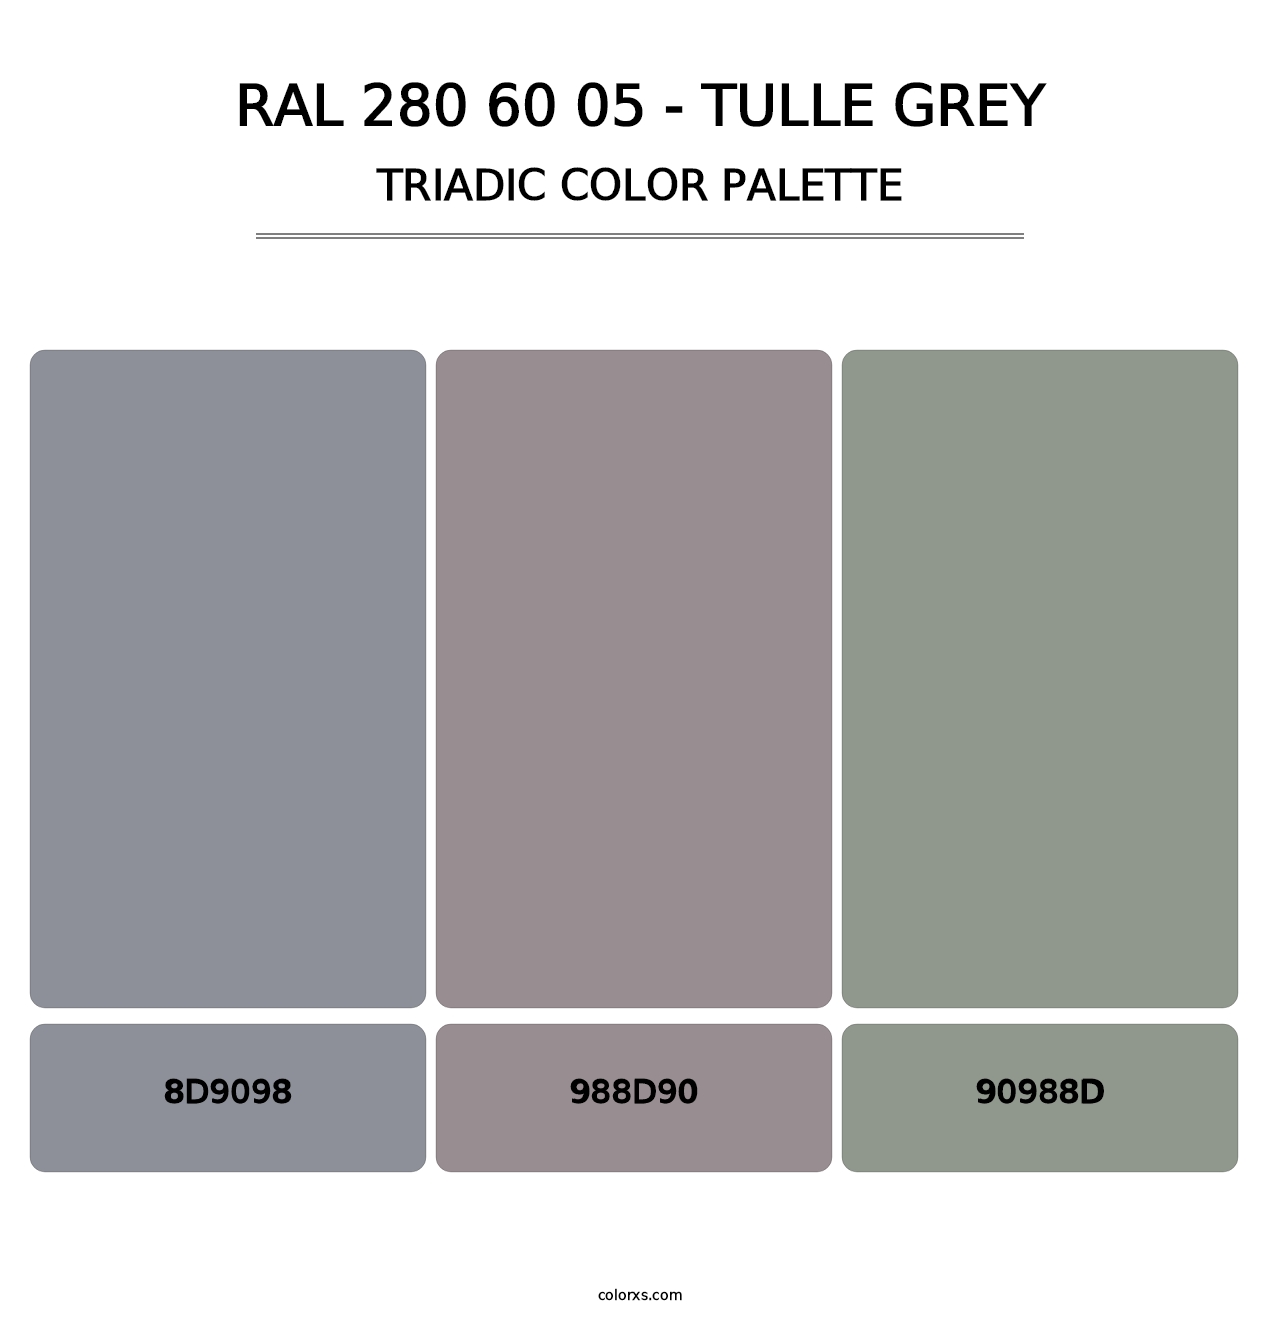 RAL 280 60 05 - Tulle Grey - Triadic Color Palette